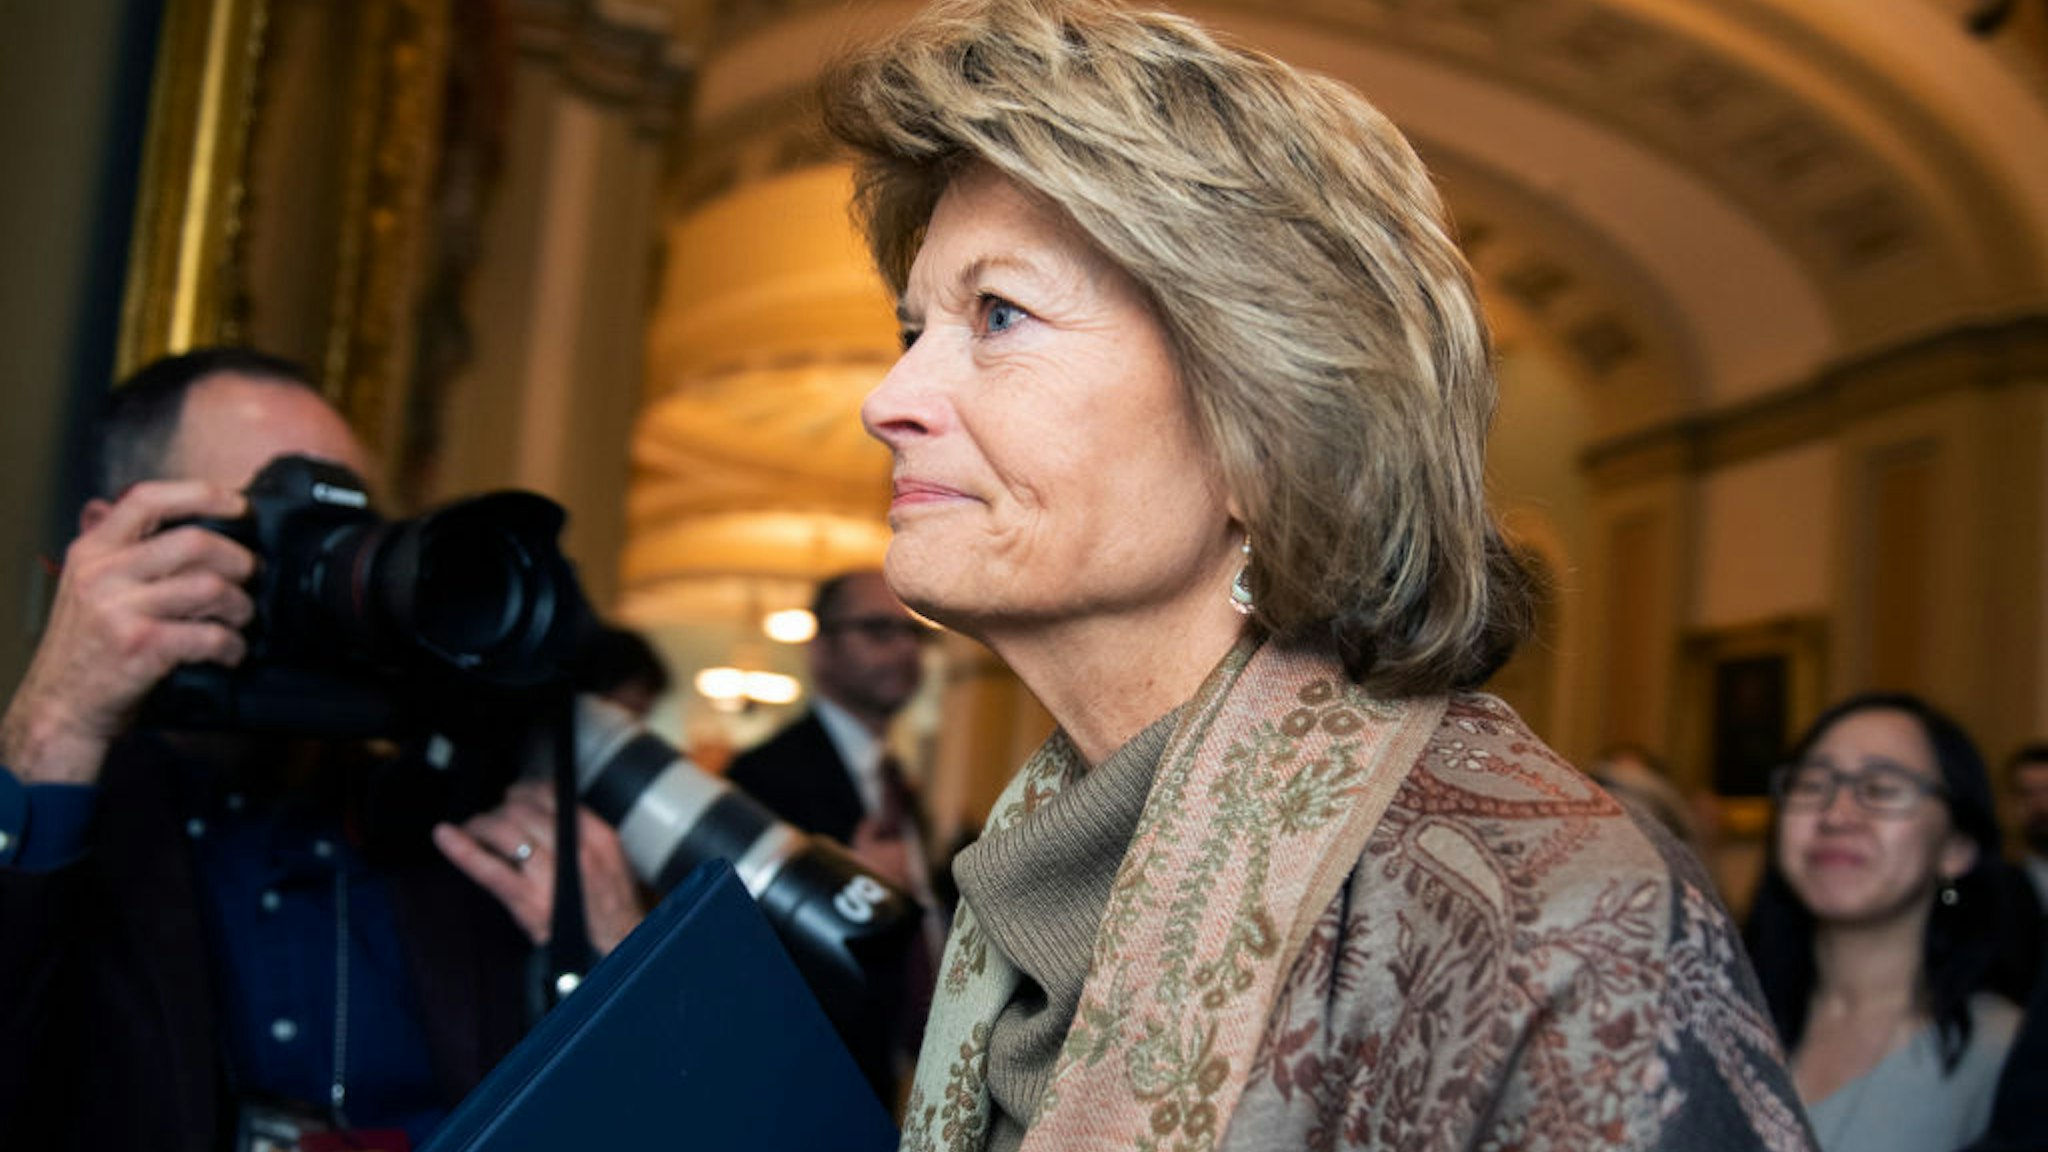 Sen. Lisa Murkowski, R-Alaska, is seen in the Capitol before the continuation of the impeachment trial of President Donald Trump on Wednesday, January 22, 2020. (Photo By Tom Williams/CQ Roll Call)